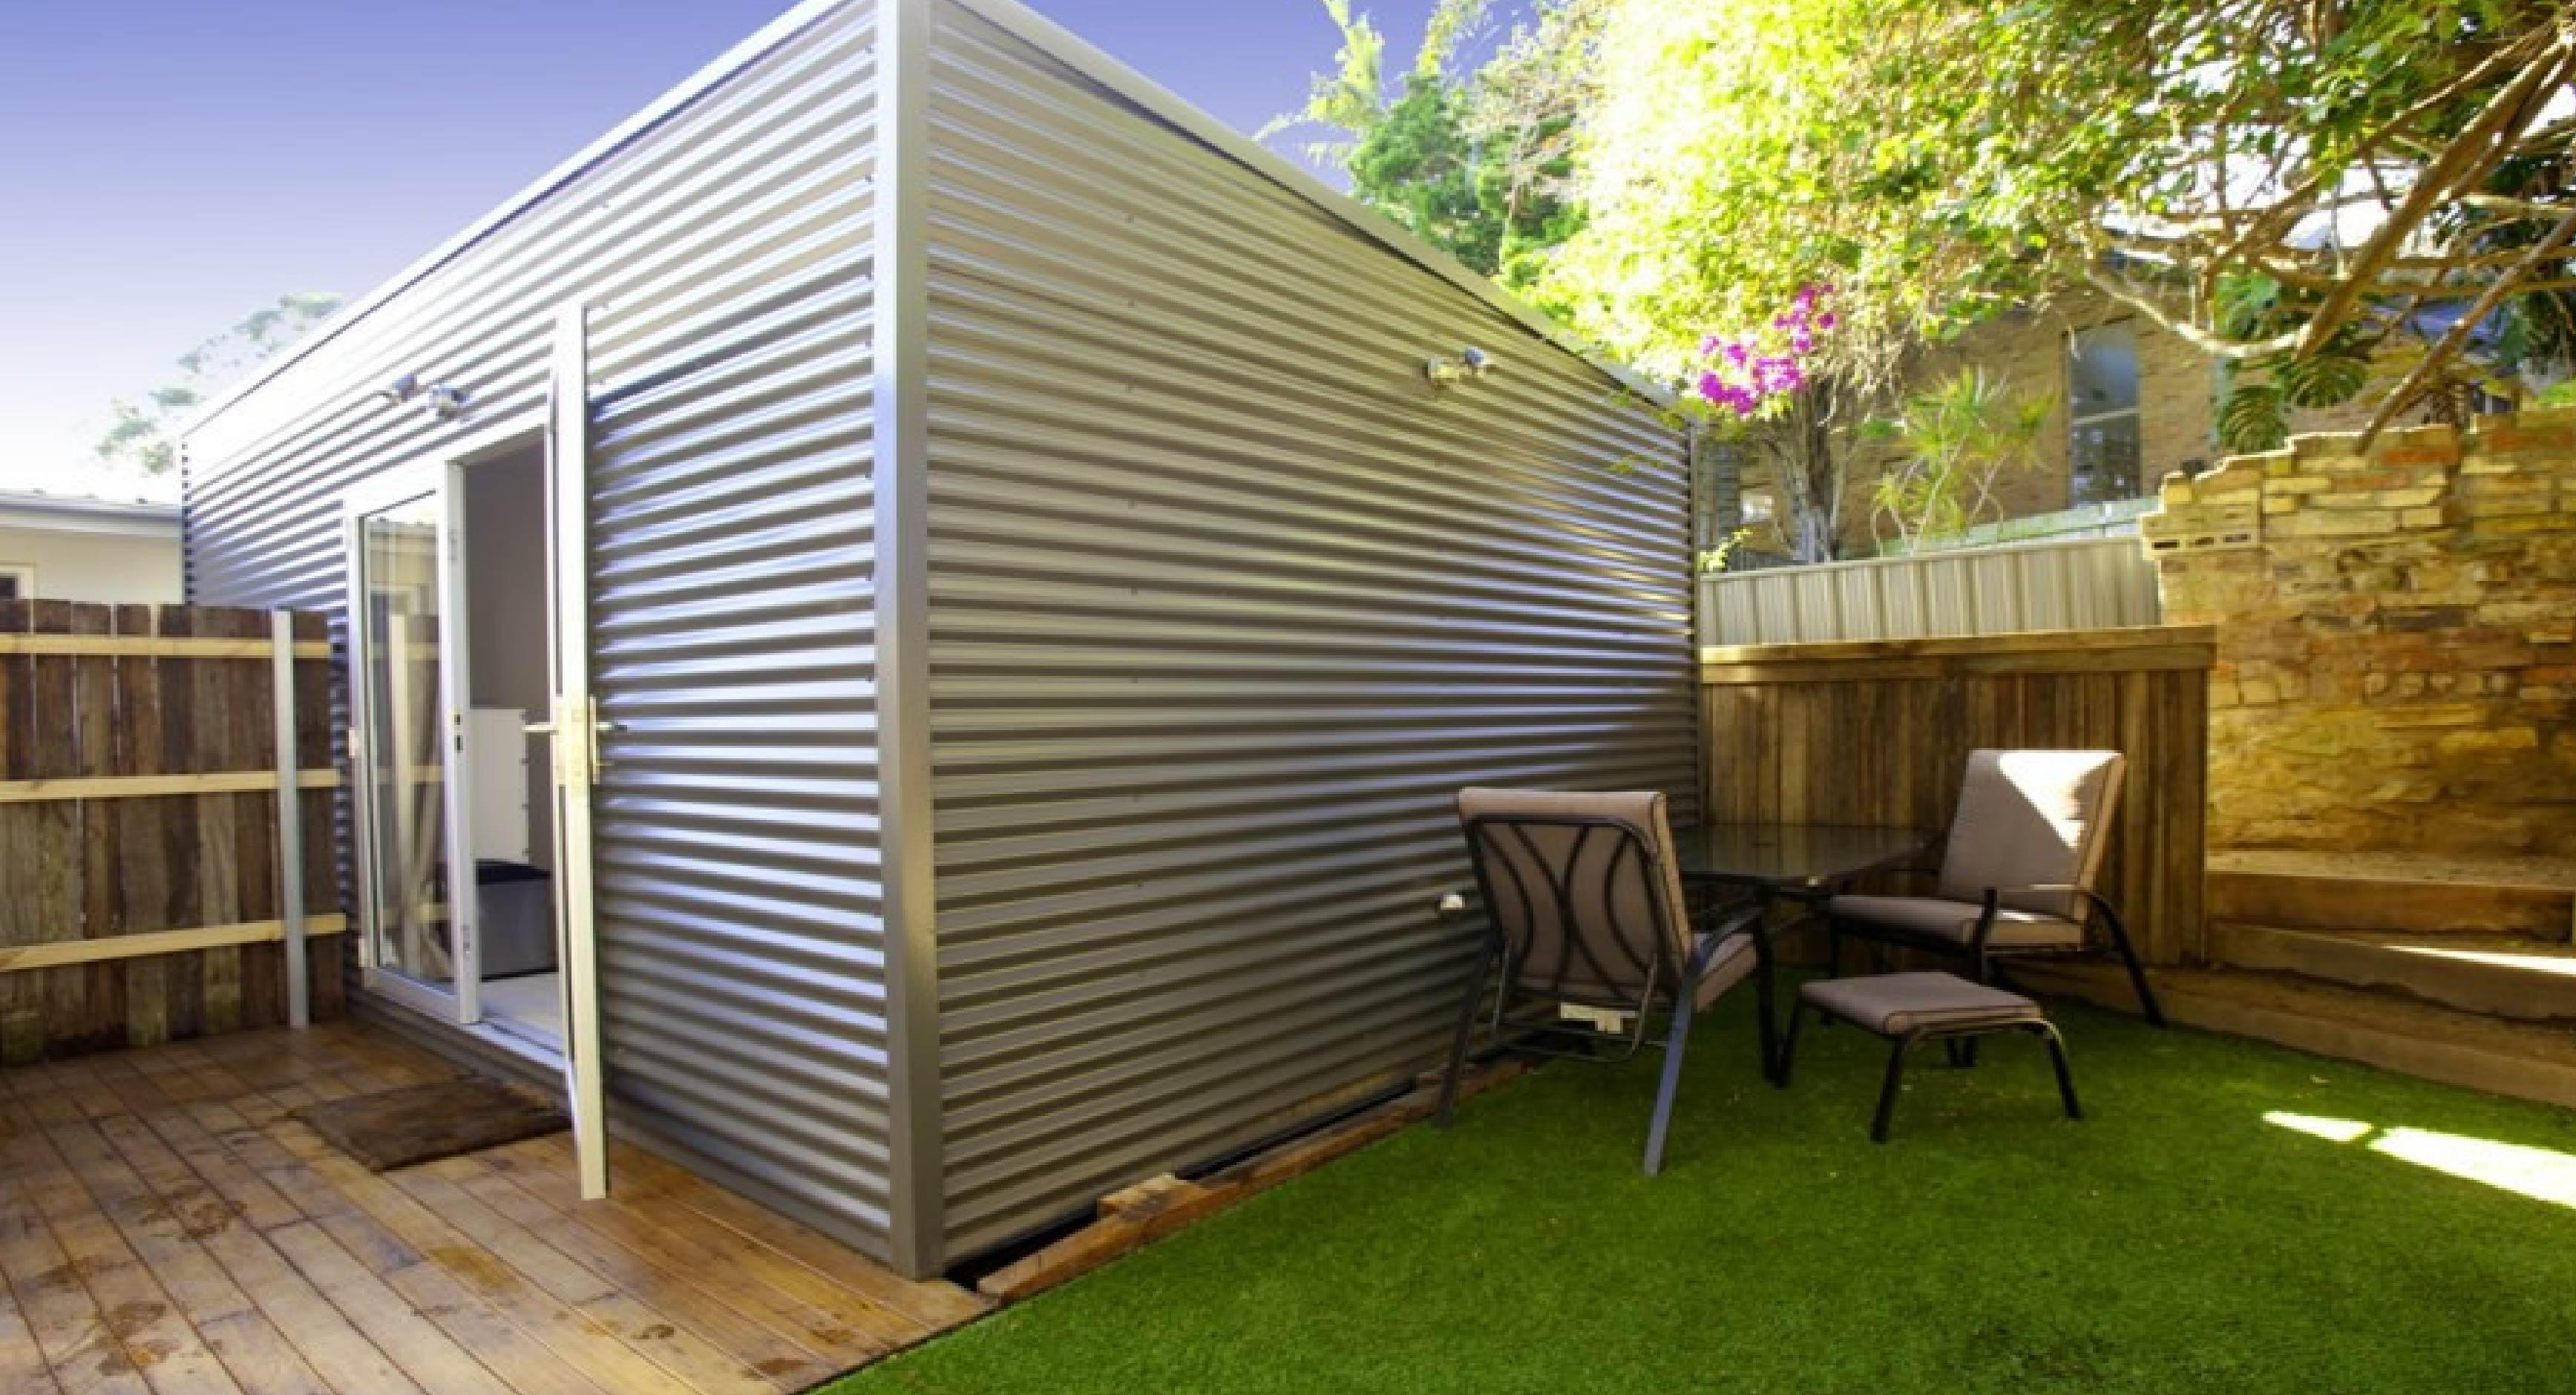 Cairns Storage Sheds • Knobs Ideas Site